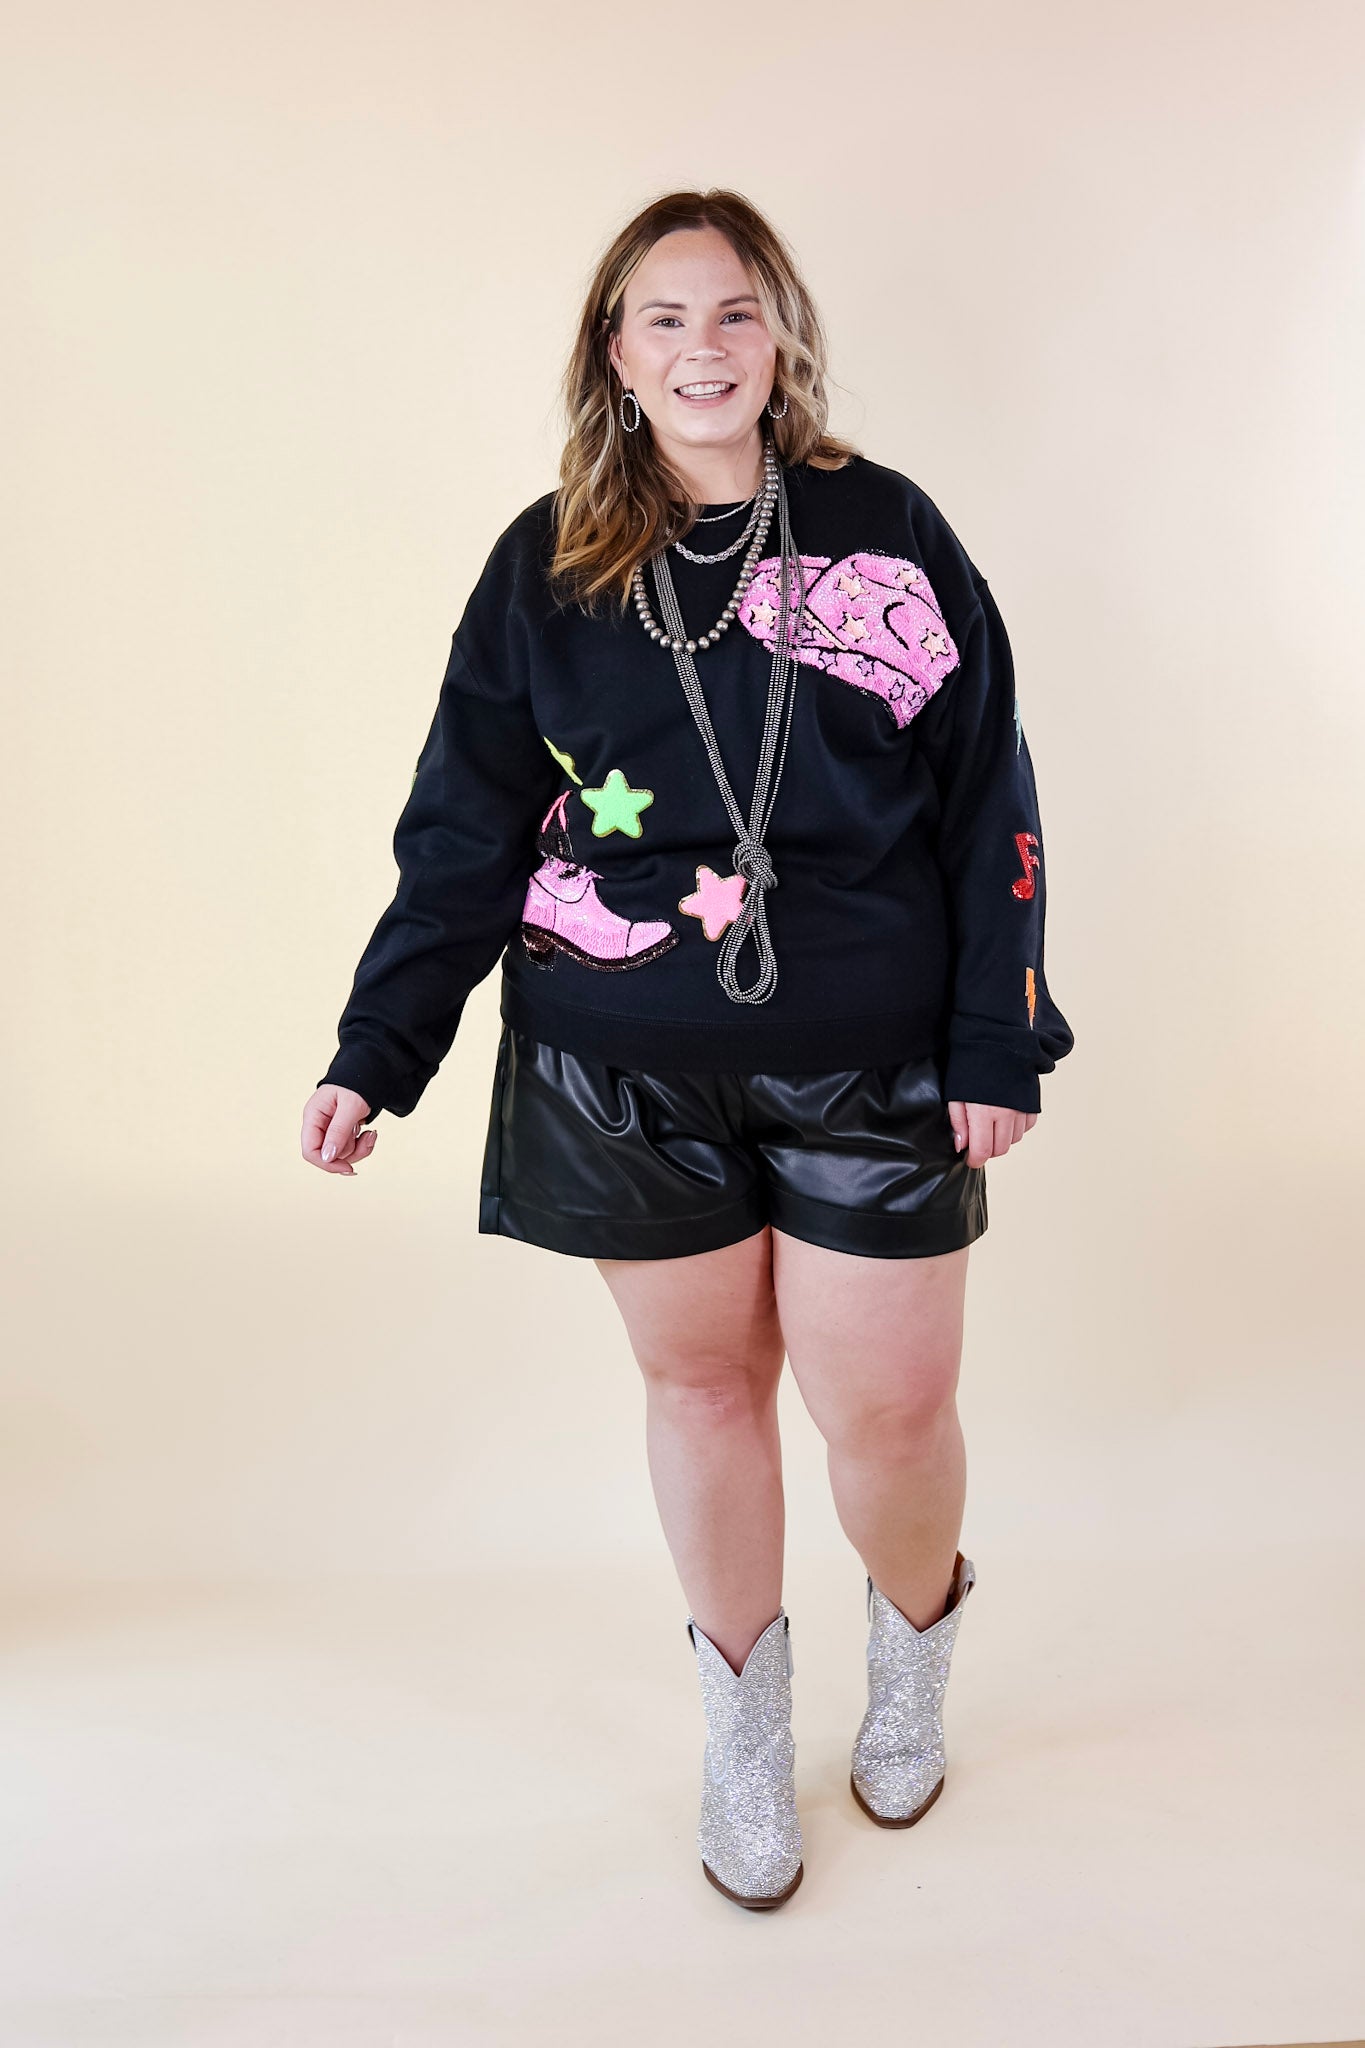 Nashville Lights Chenille and Sequin Patch Graphic Sweatshirt in Black - Giddy Up Glamour Boutique